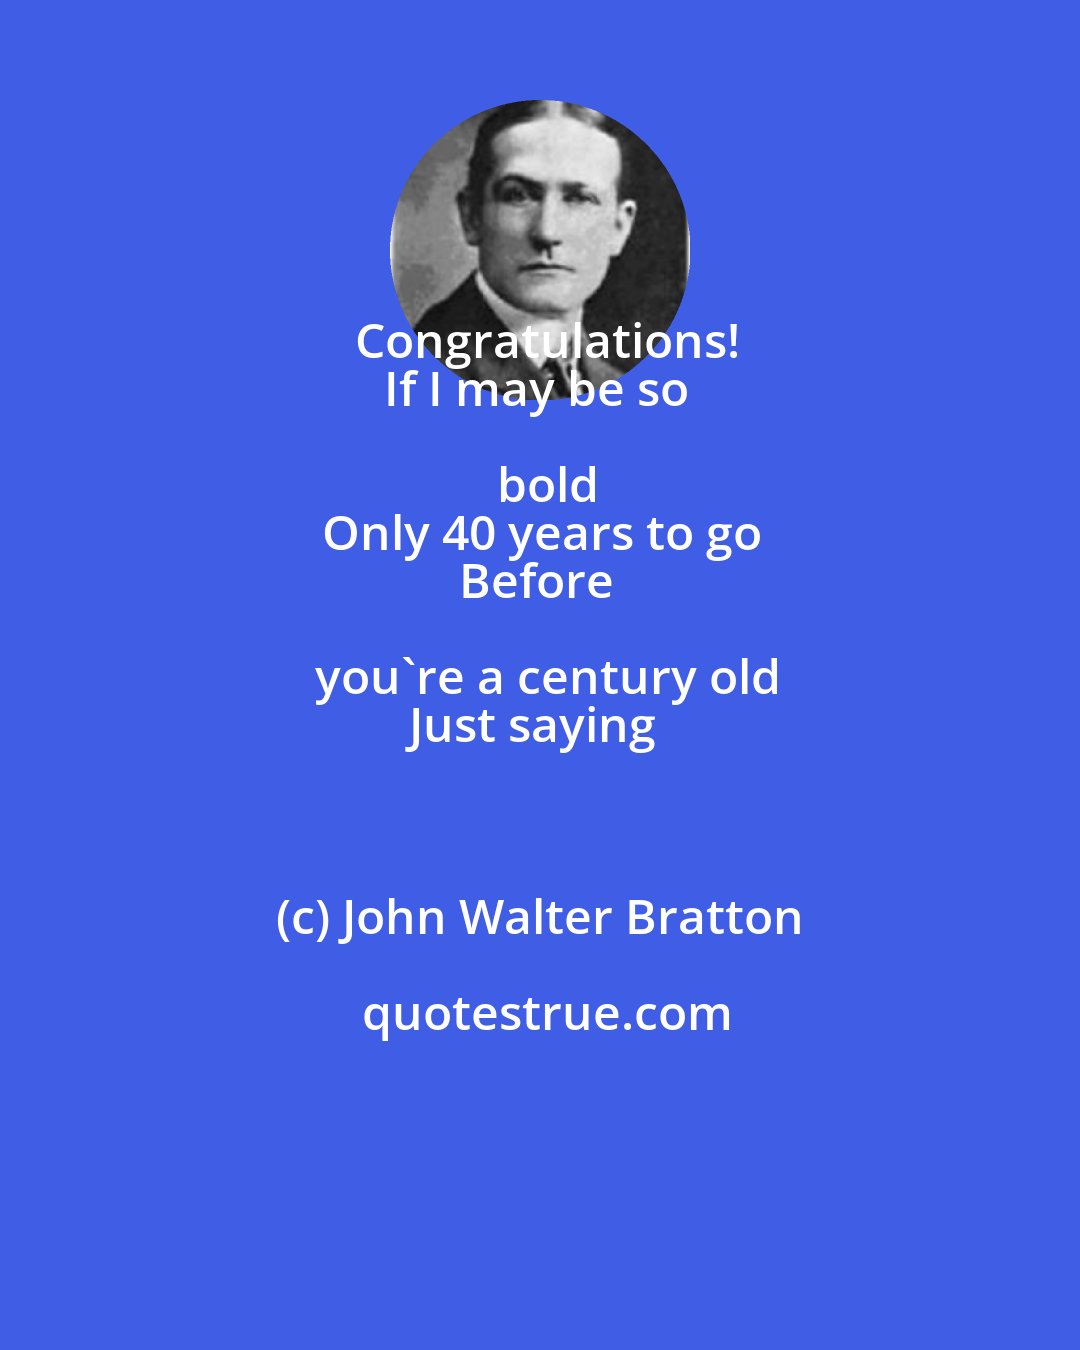 John Walter Bratton: Congratulations!
If I may be so bold
Only 40 years to go
Before you're a century old
Just saying